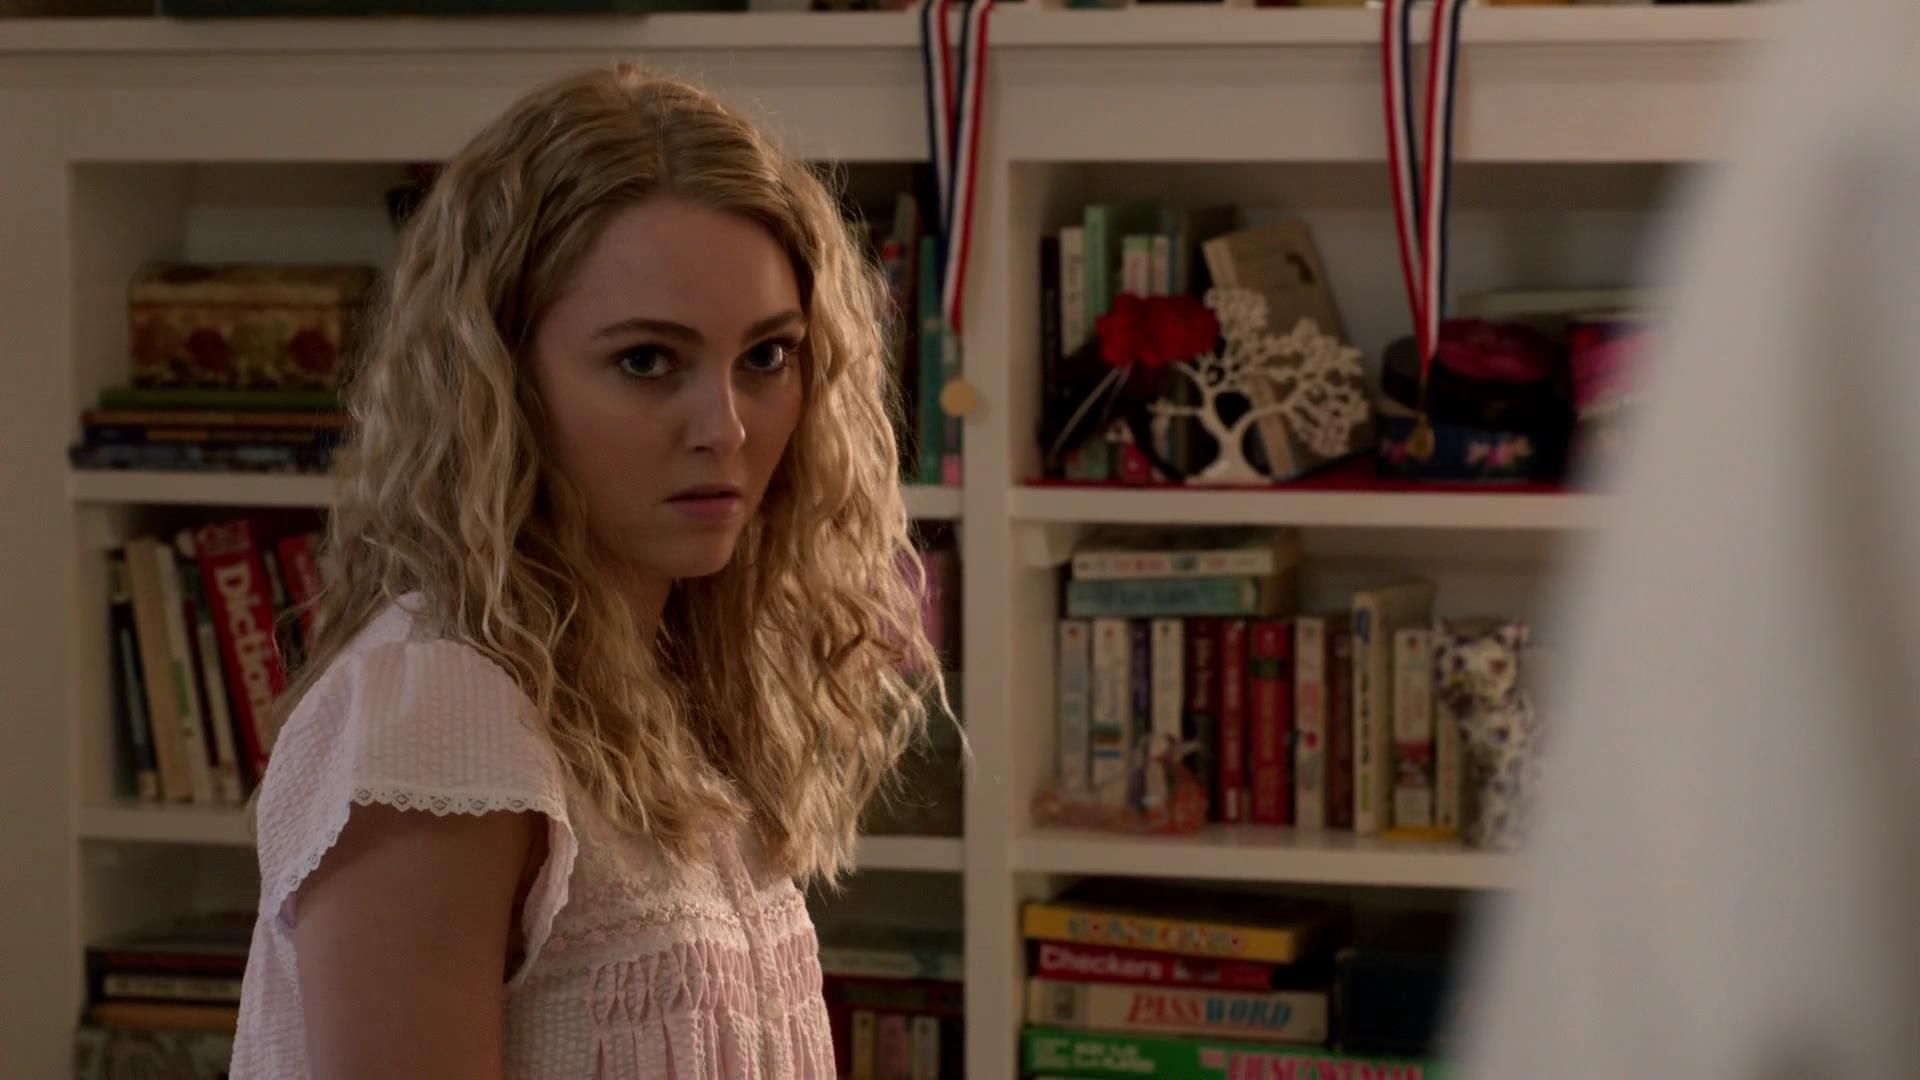 Image Thecarriediaries0101 0168 The Carrie Diaries